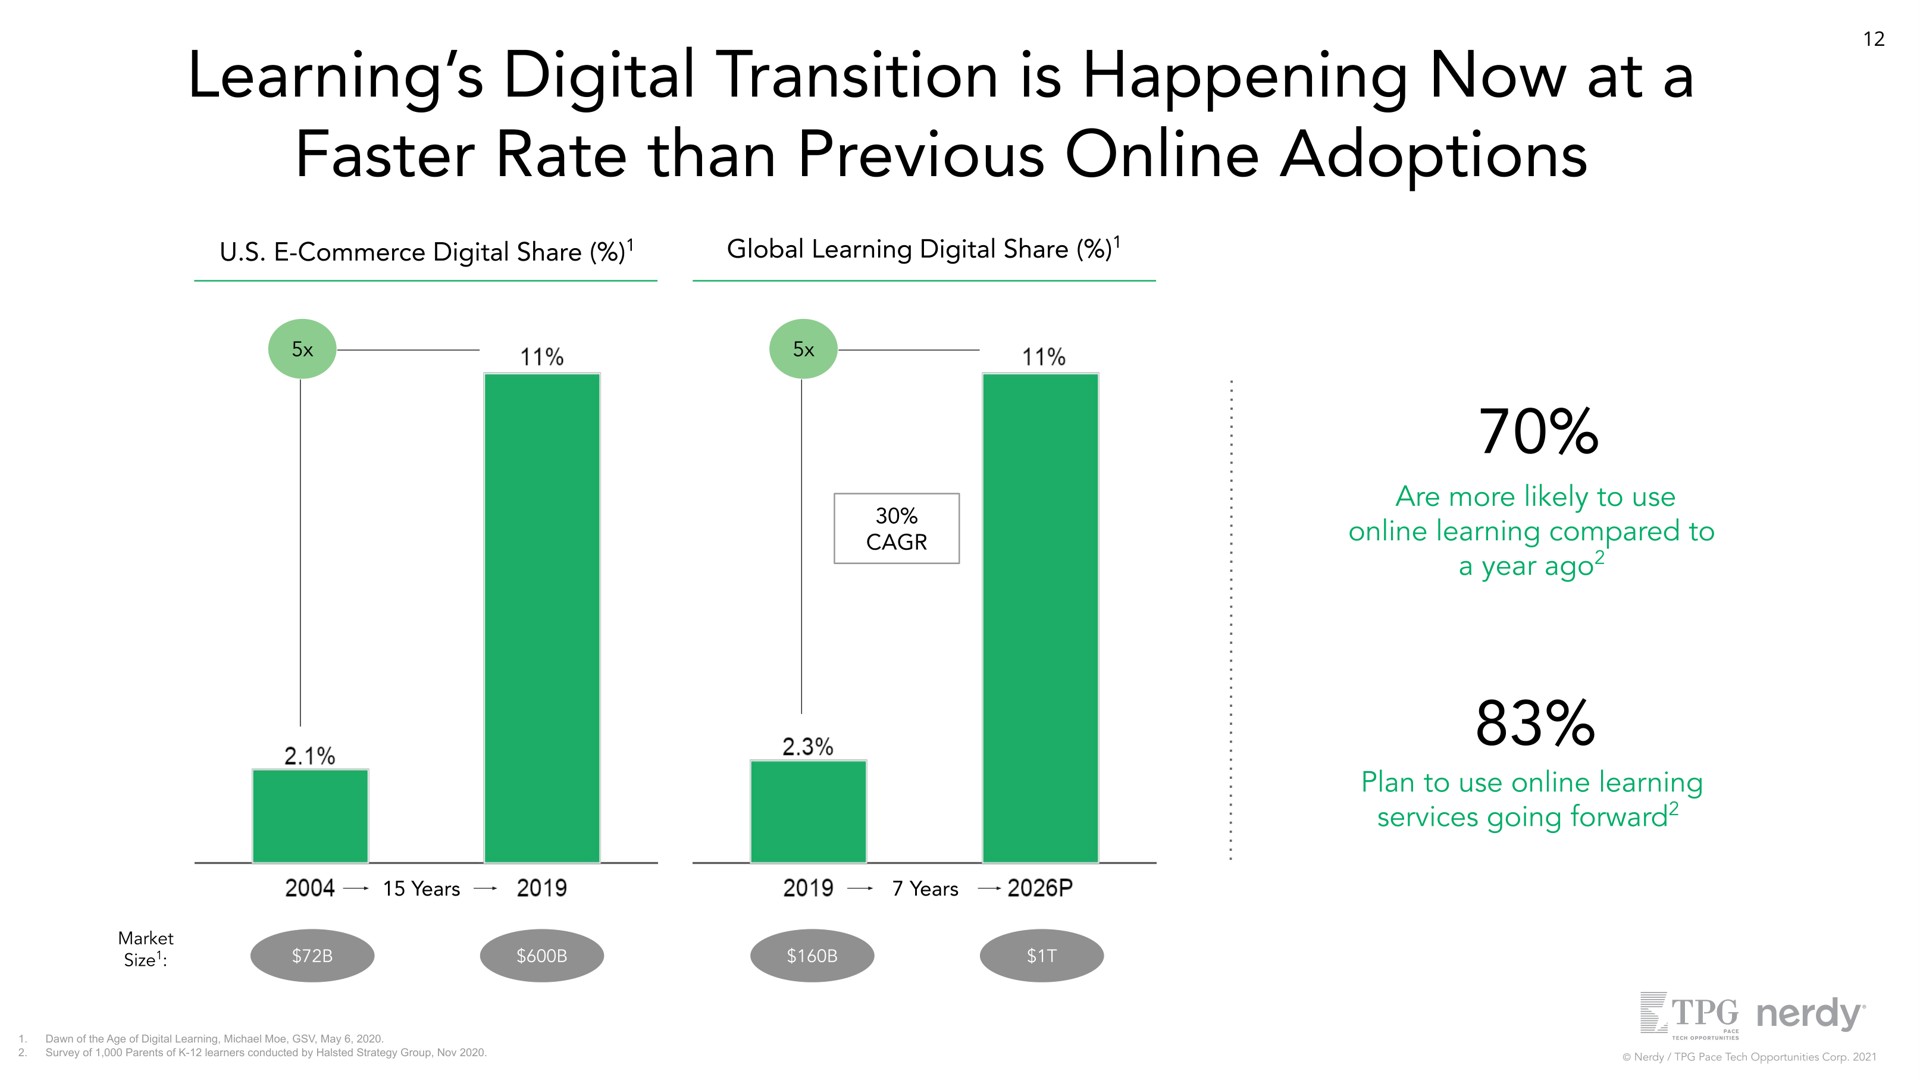 dawn of the age of digital learning may survey of parents of learners conducted by strategy group transition is happening now faster rate than previous adoptions | Nerdy